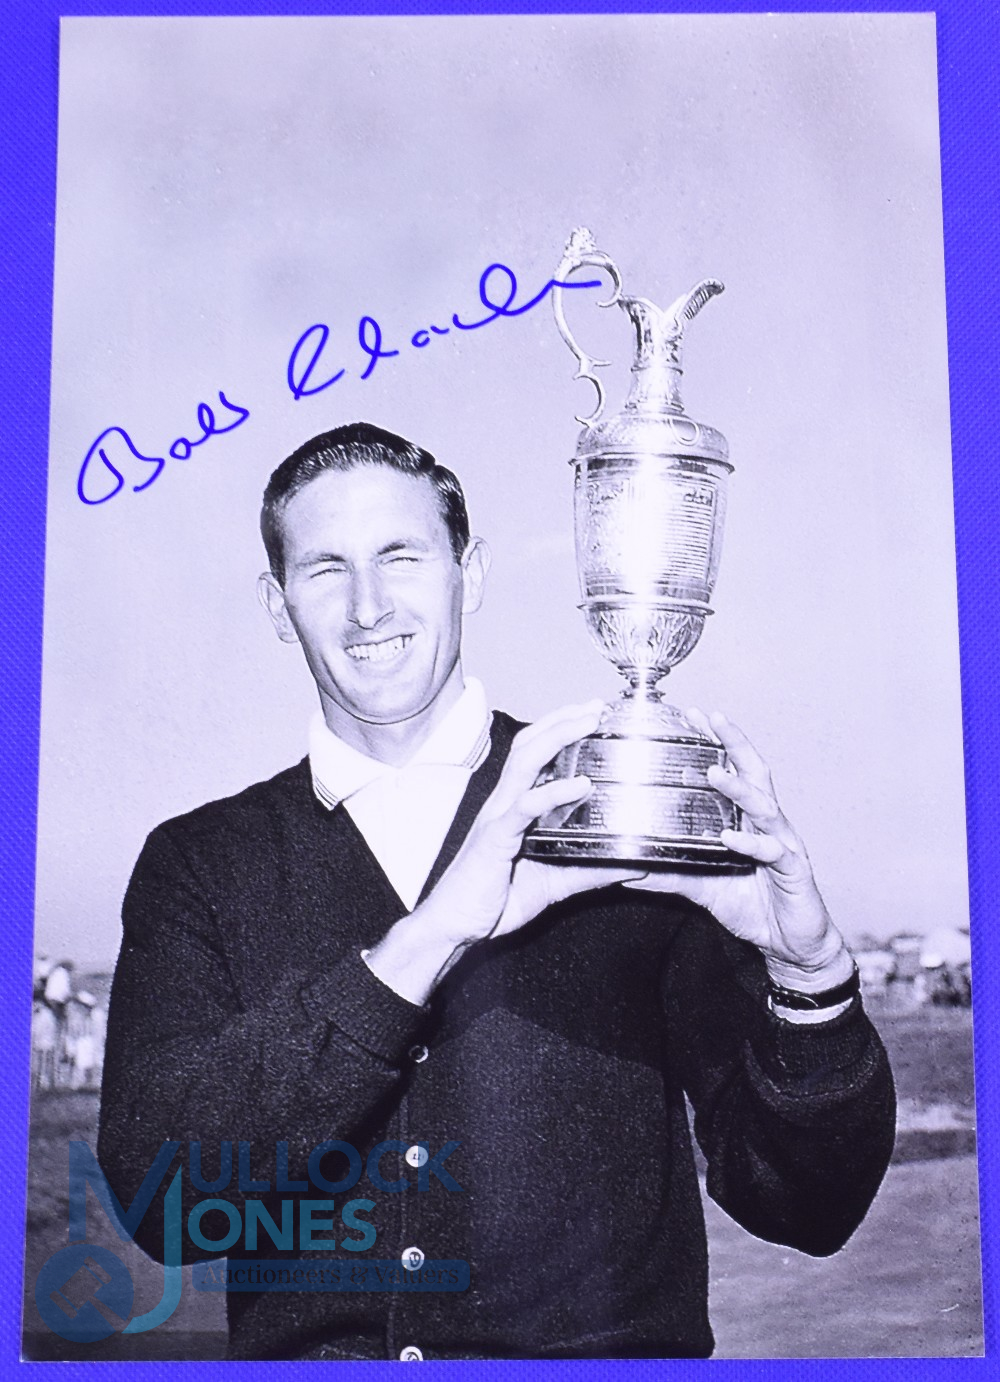 1963 Bob Charles (NZ) Open Golf Champion signed b&w photograph - played at Royal Lytham with